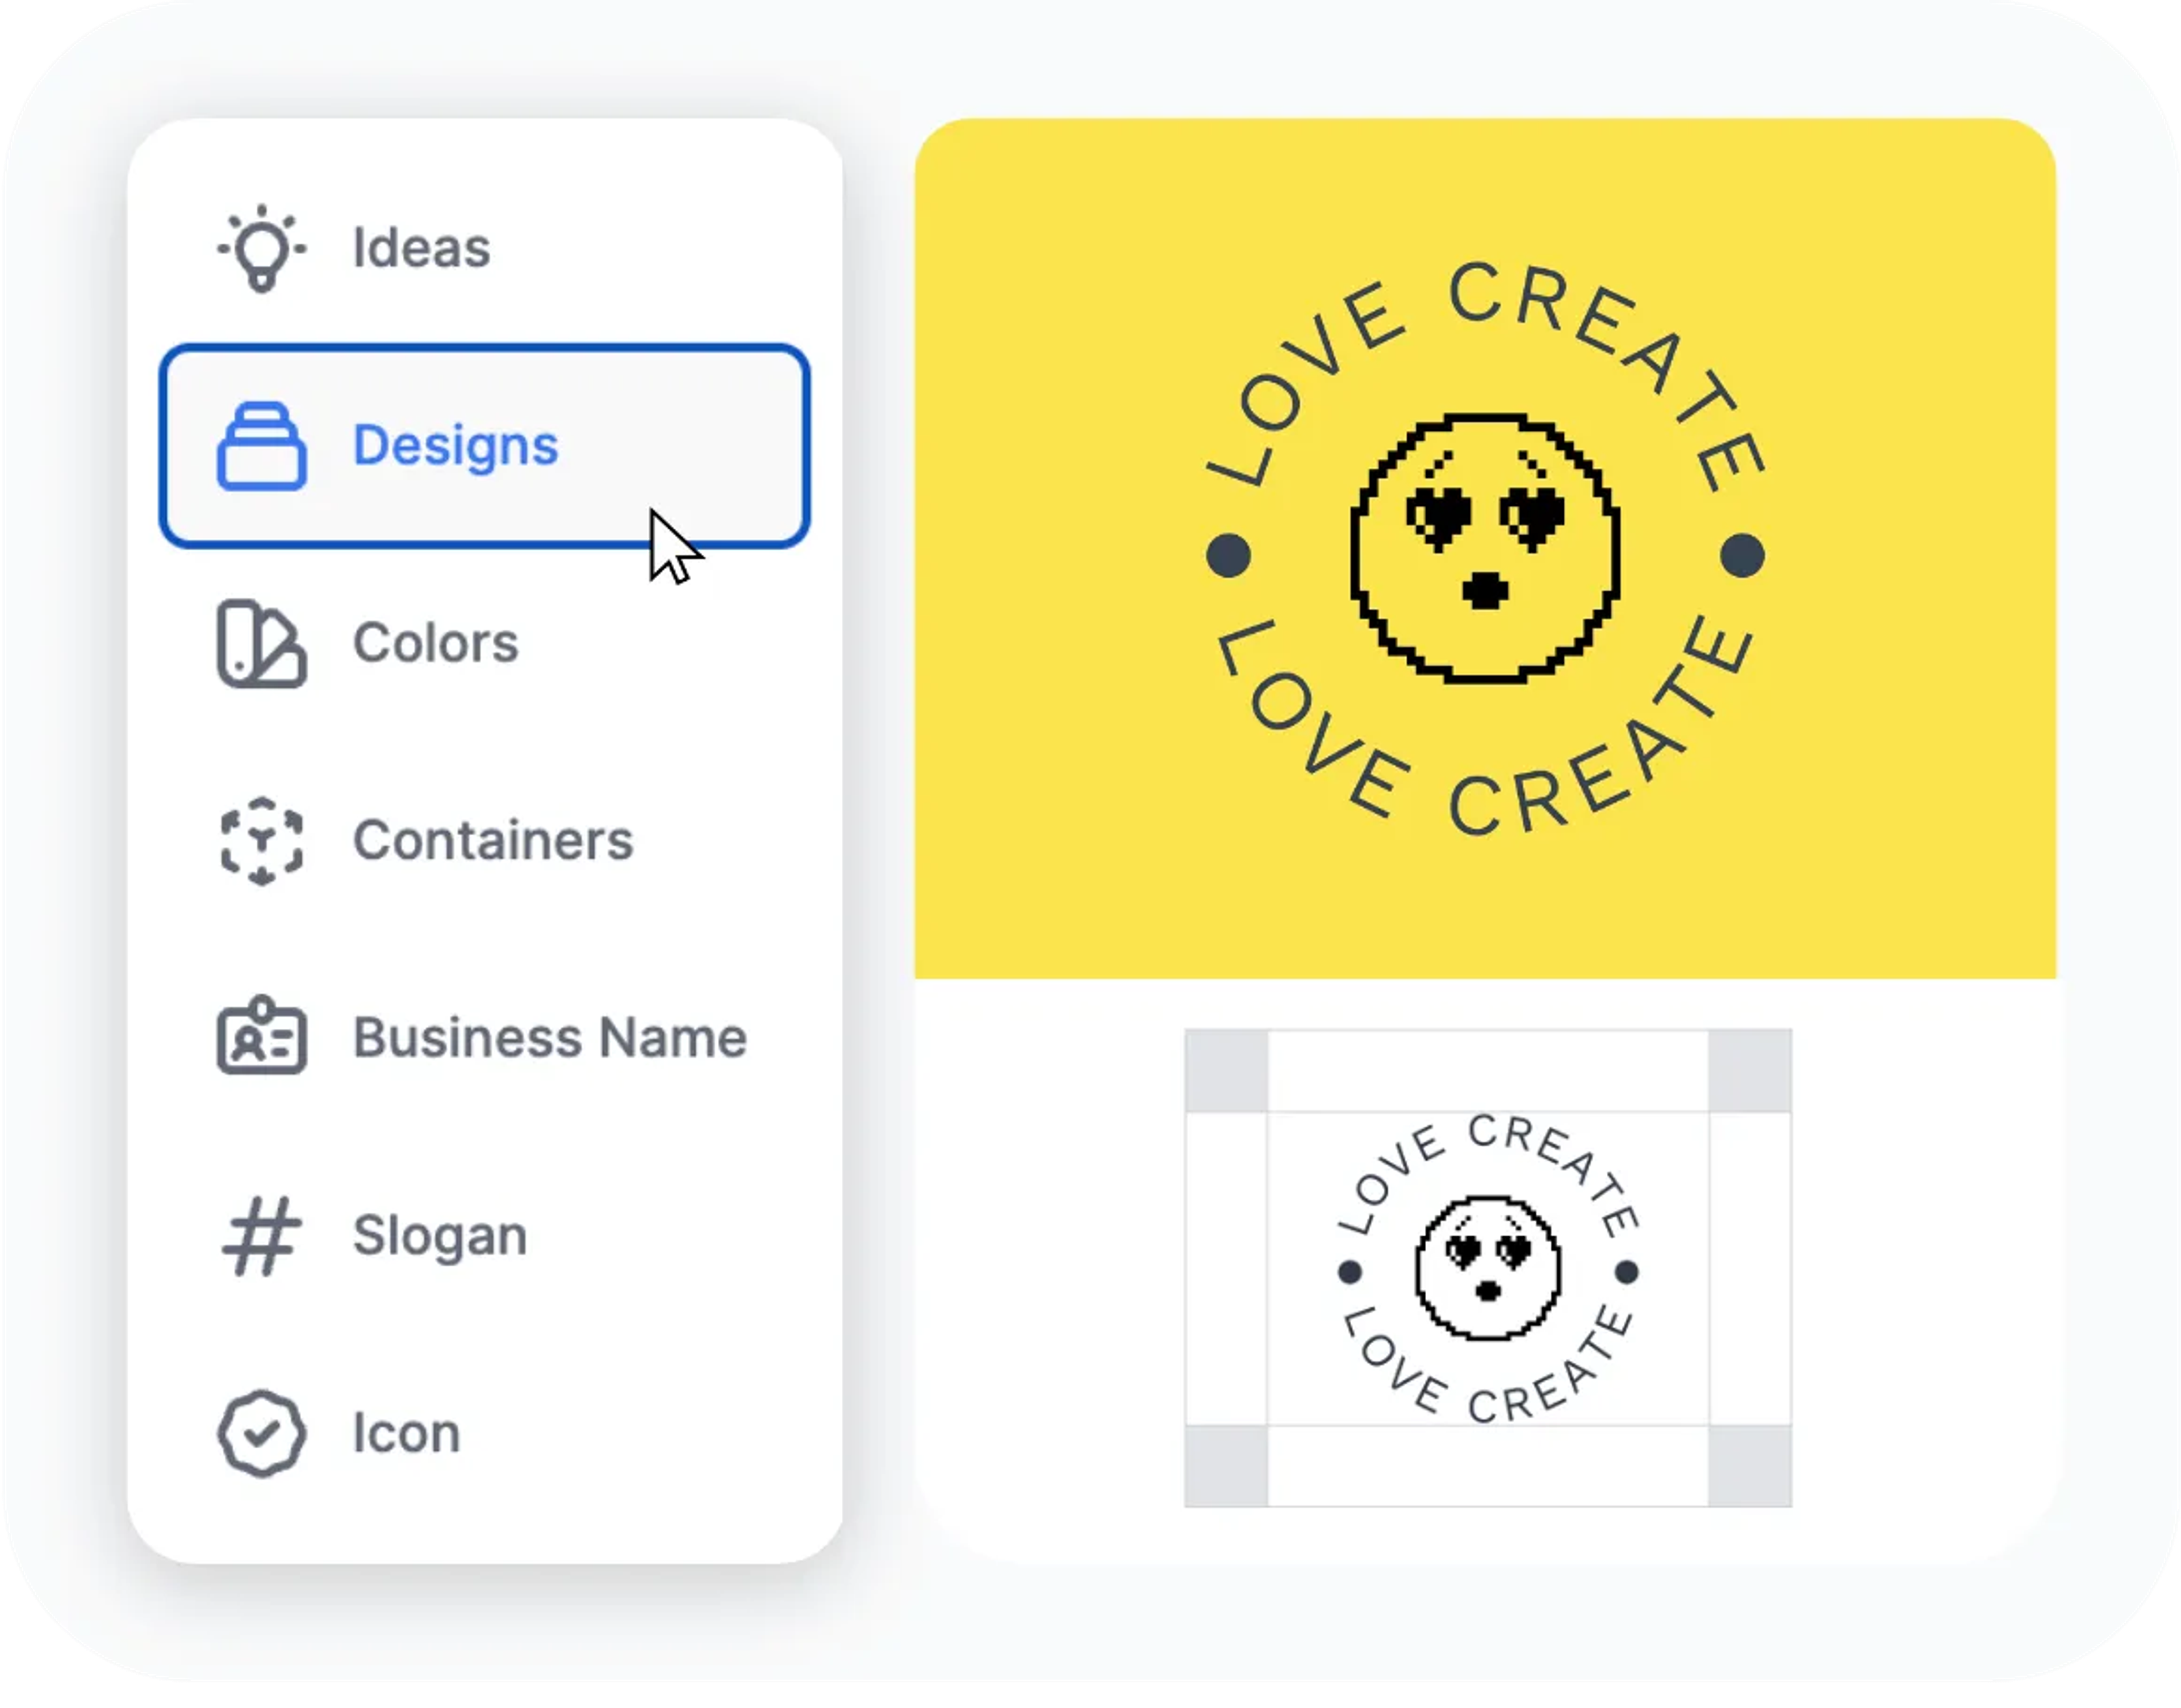 Create and download your free logo.